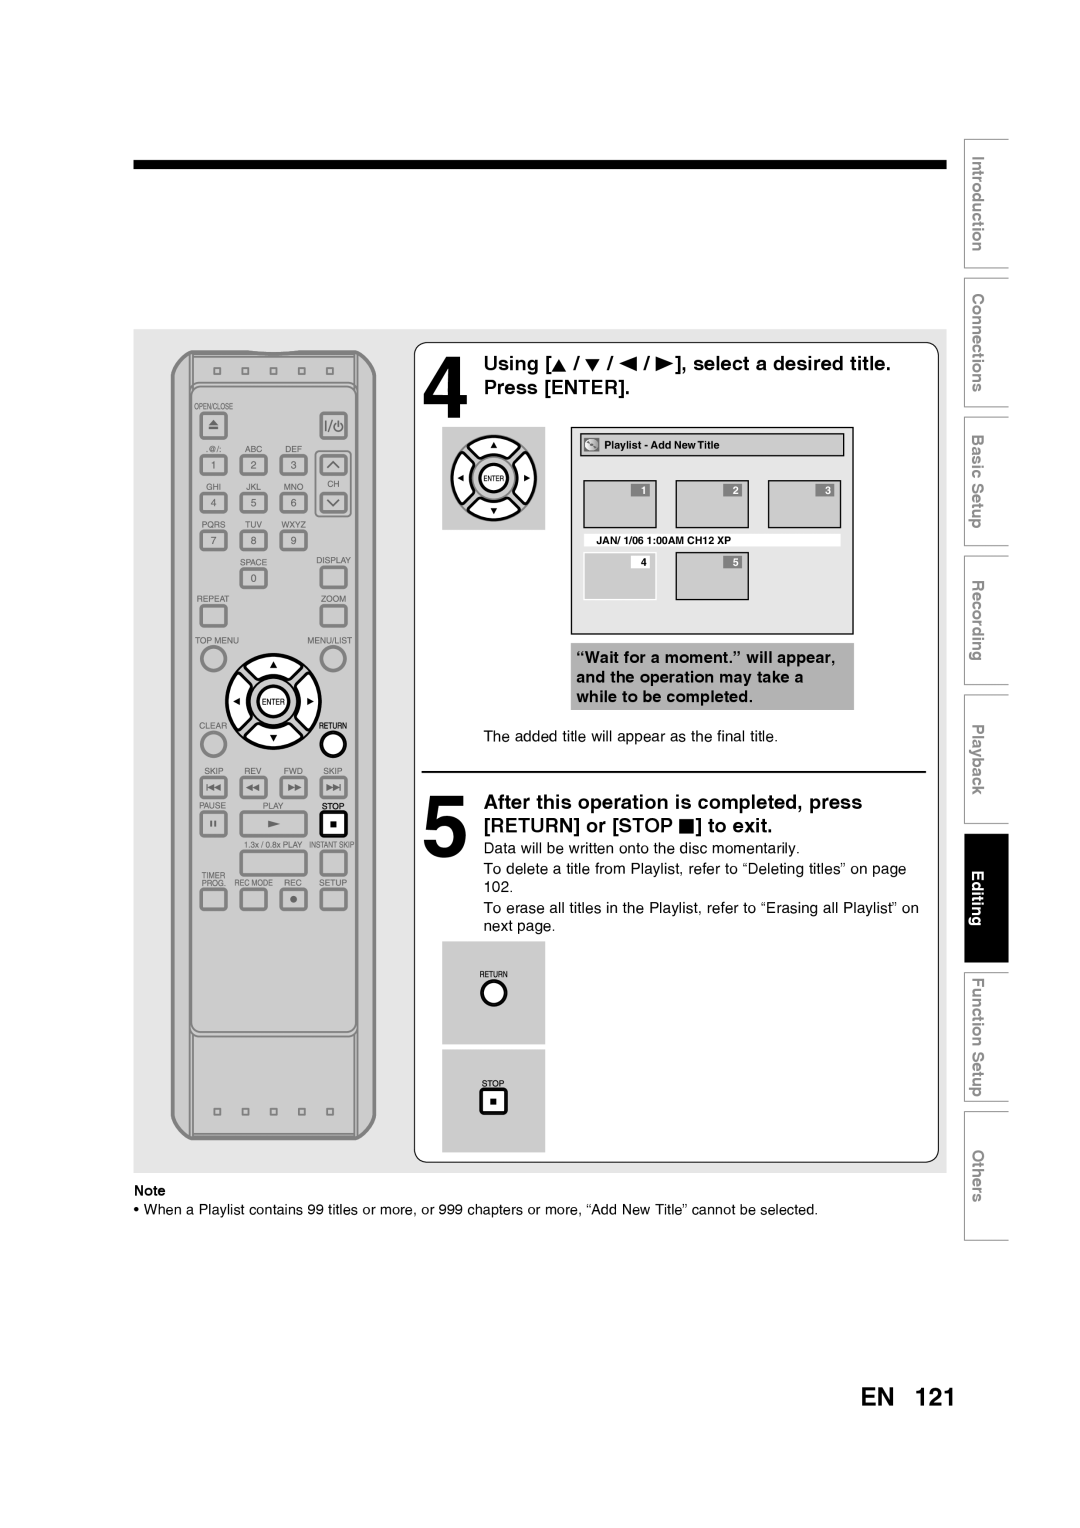 Toshiba D-RW2SU/D-RW2SC manual Using K / L / s / B, select a desired title Press ENTER, Editing Function Setup Others 